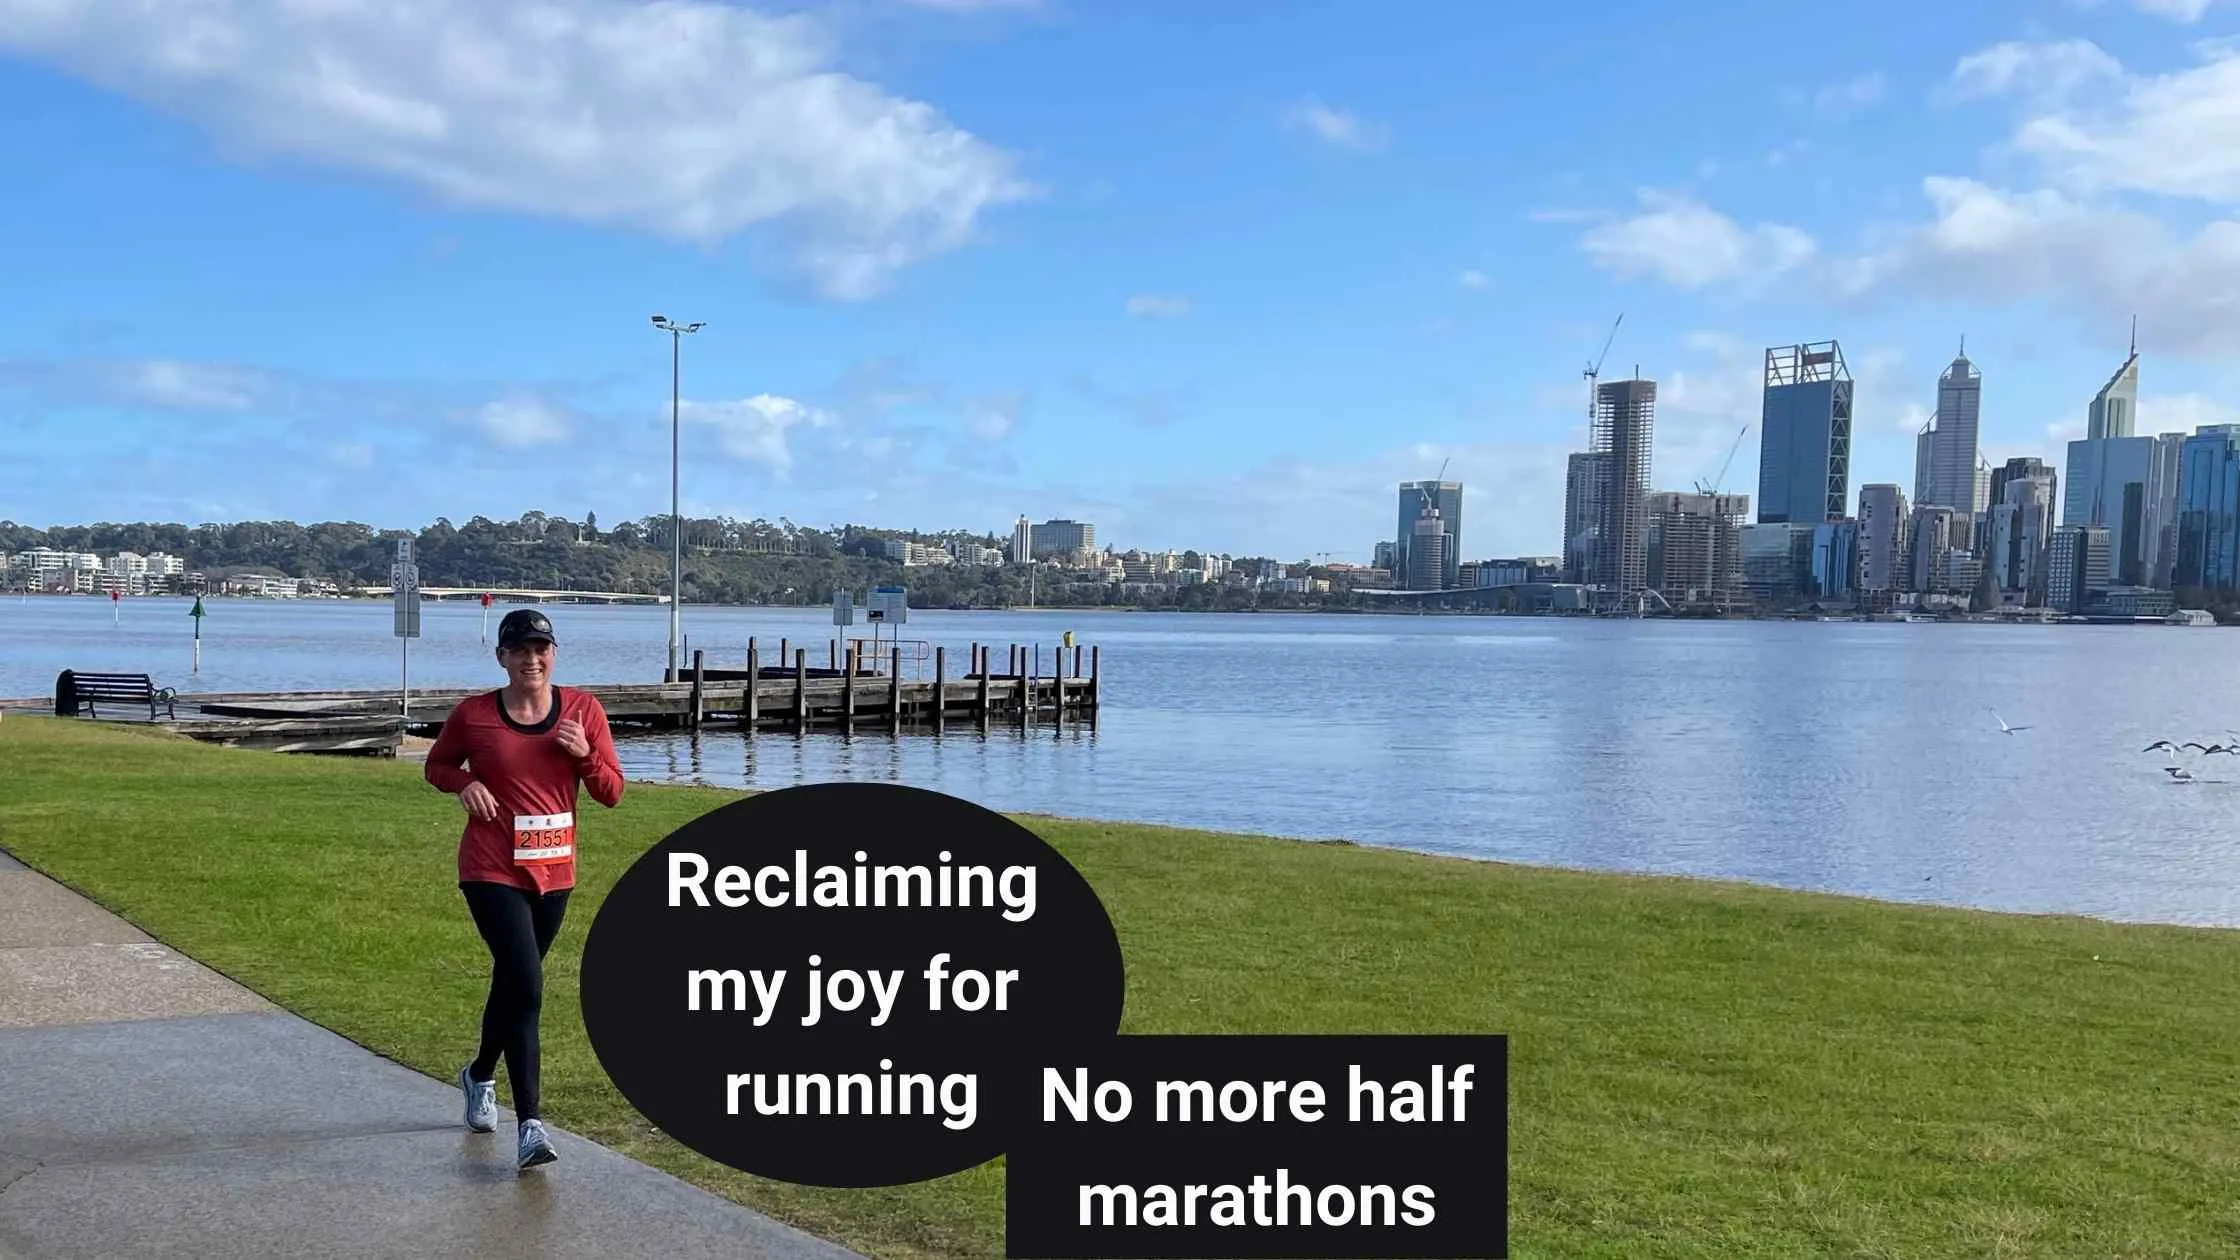 A photo of Kate Rowen running with the Perth city in the background, with text overlaid saying "Reclaiming my joy for running. No more half marathons"